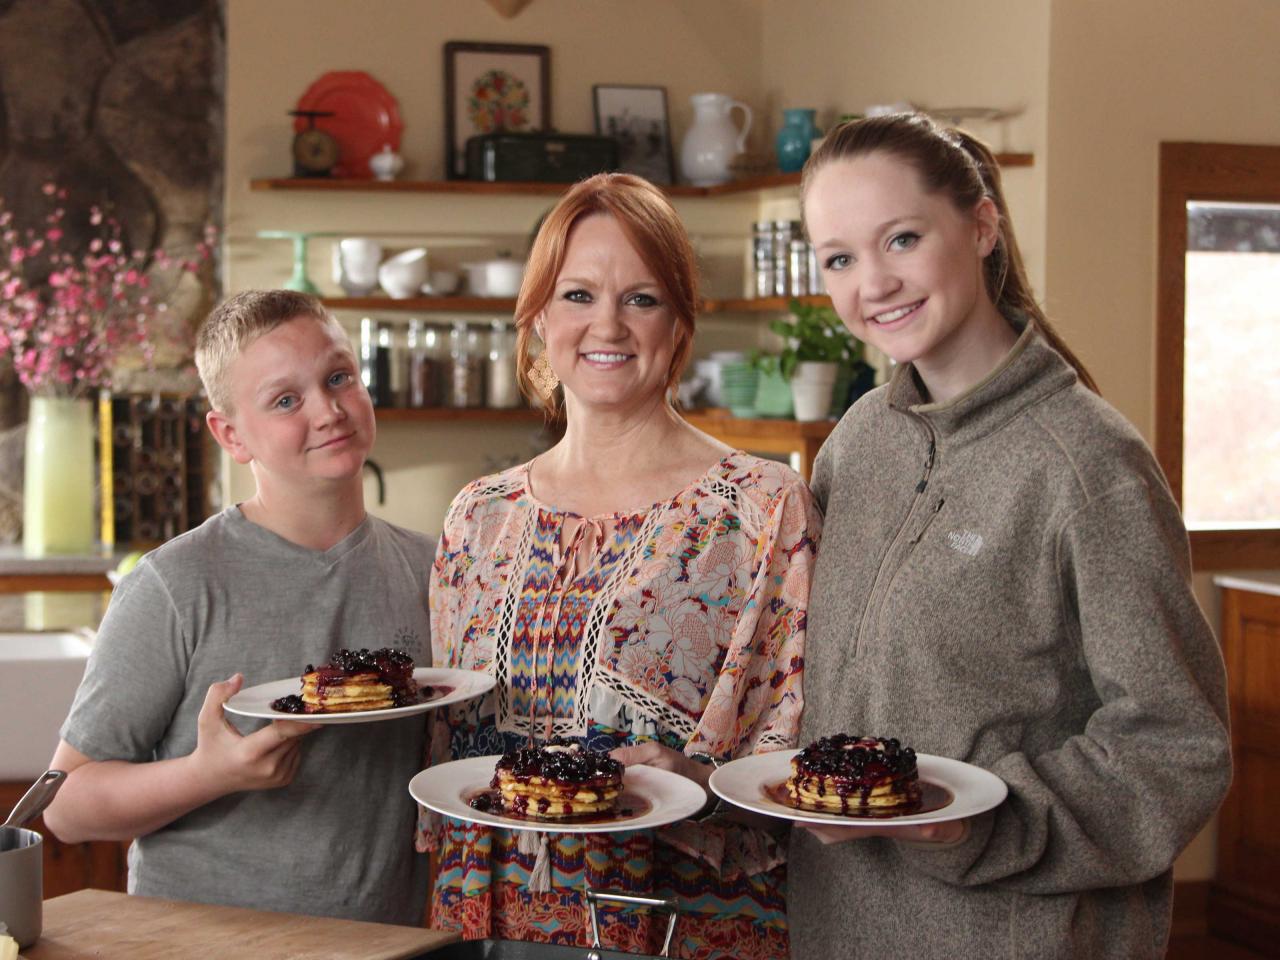 The Pioneer Woman Cooks: Dinnertime by Ree Drummond – LOREC Ranch